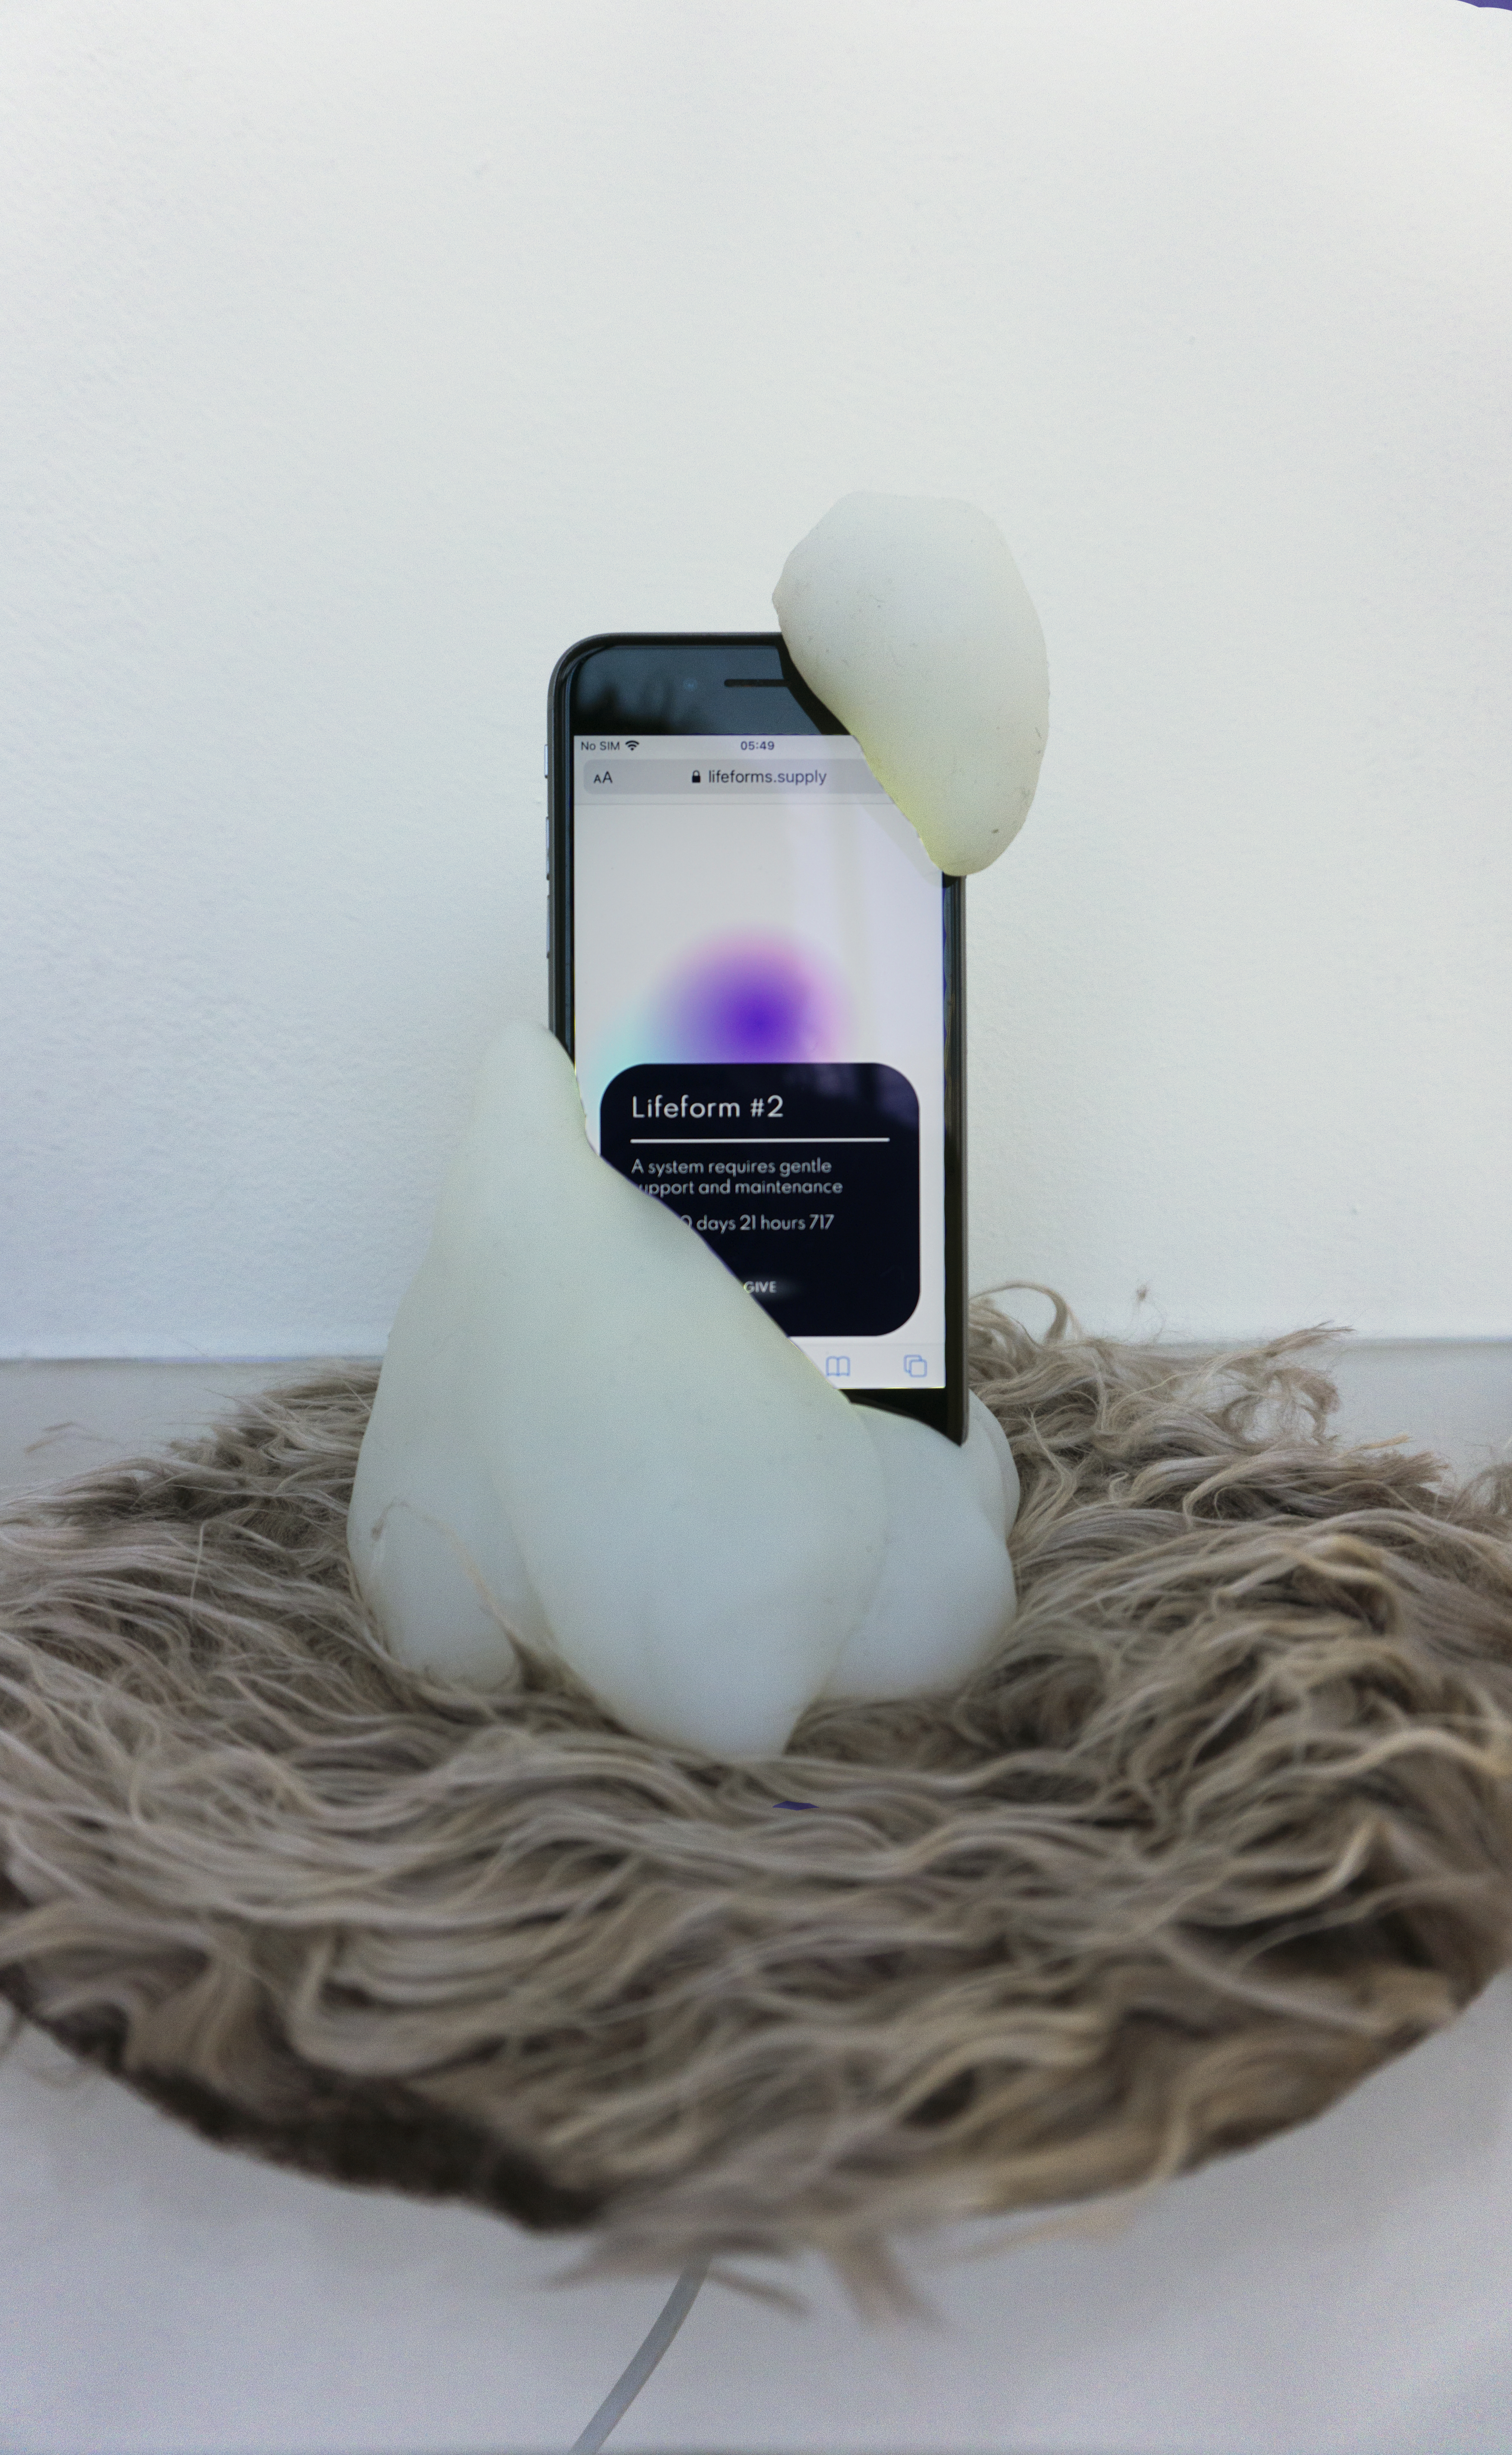 Lifeform 3 physically installed at the Kunstverein in Hamburg. It is also a translucent silicone lumpy body for an iphone with a furry nest